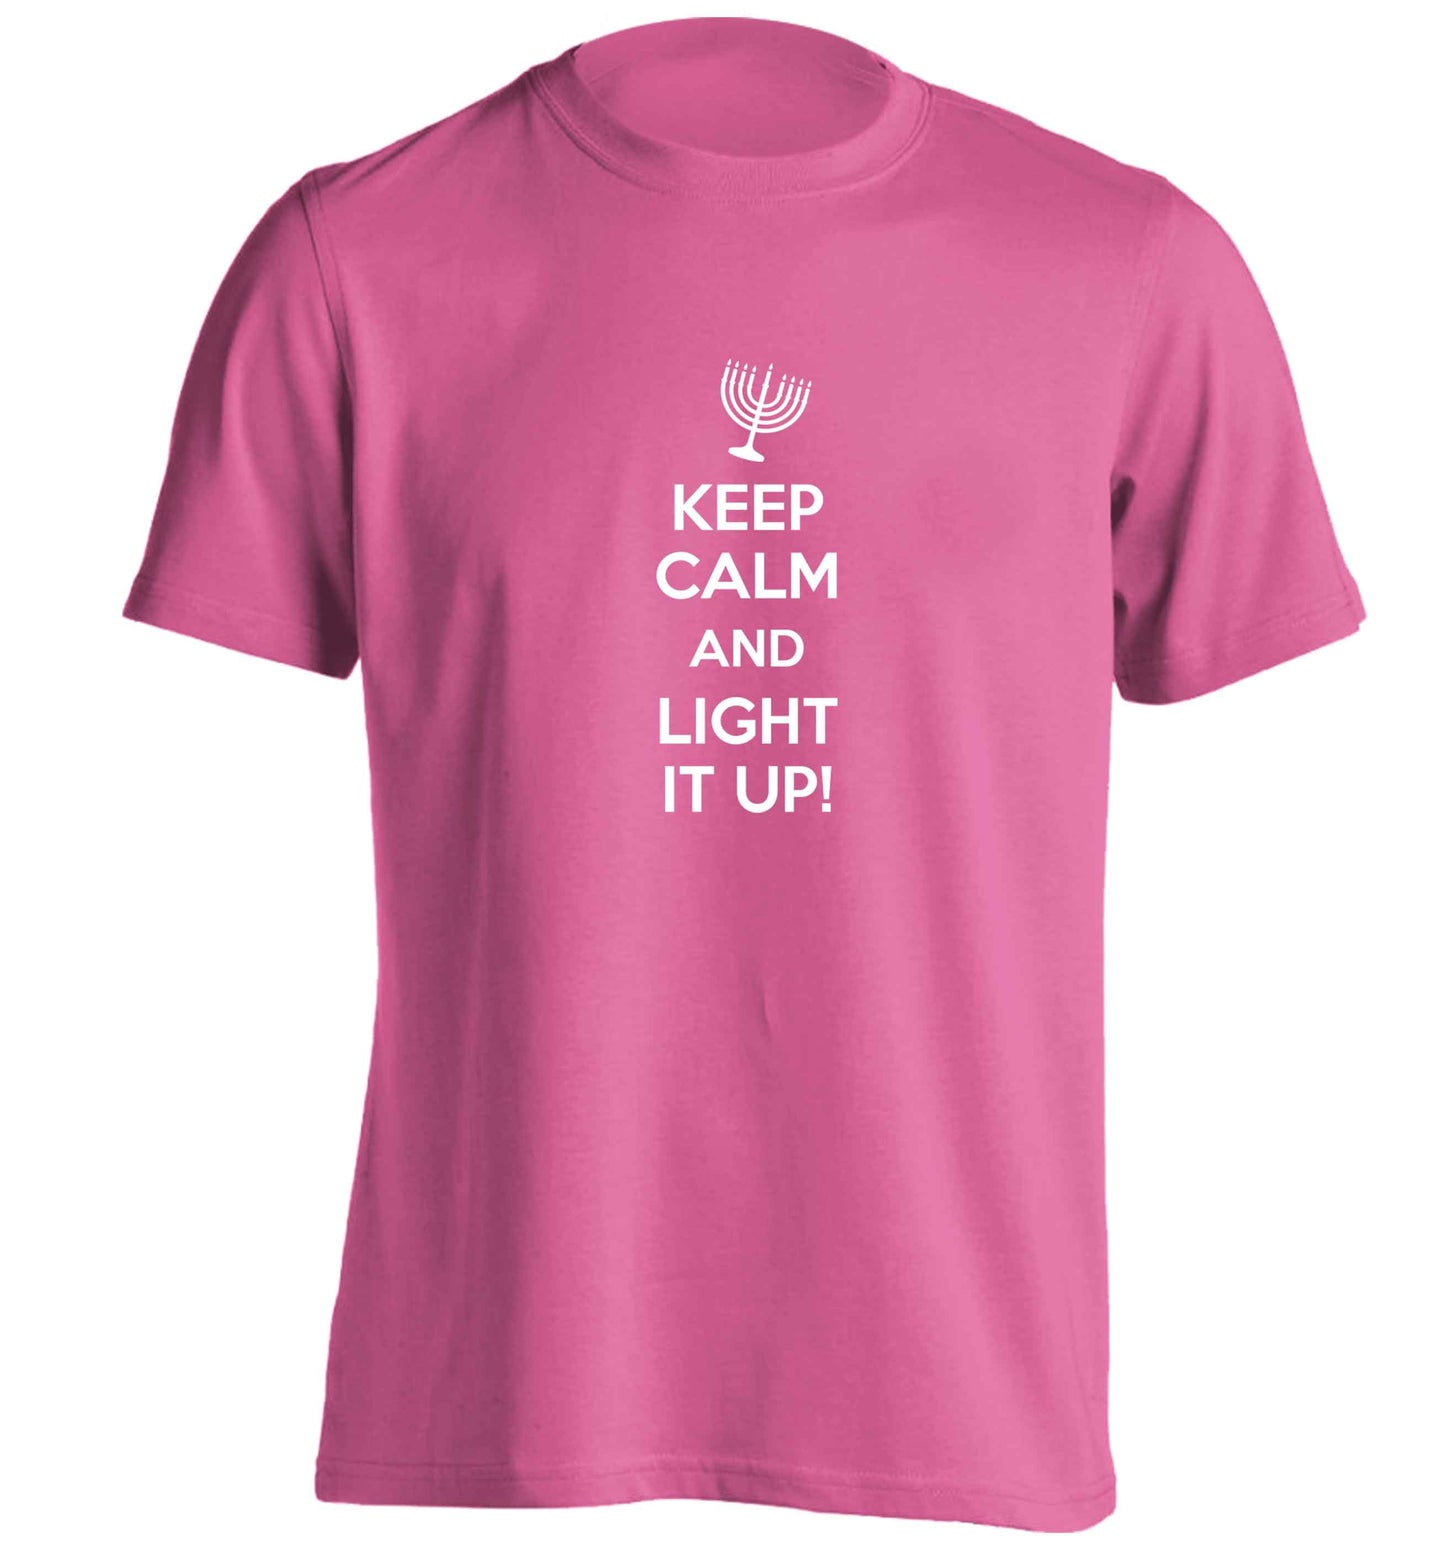 Keep calm and light it up adults unisex pink Tshirt 2XL